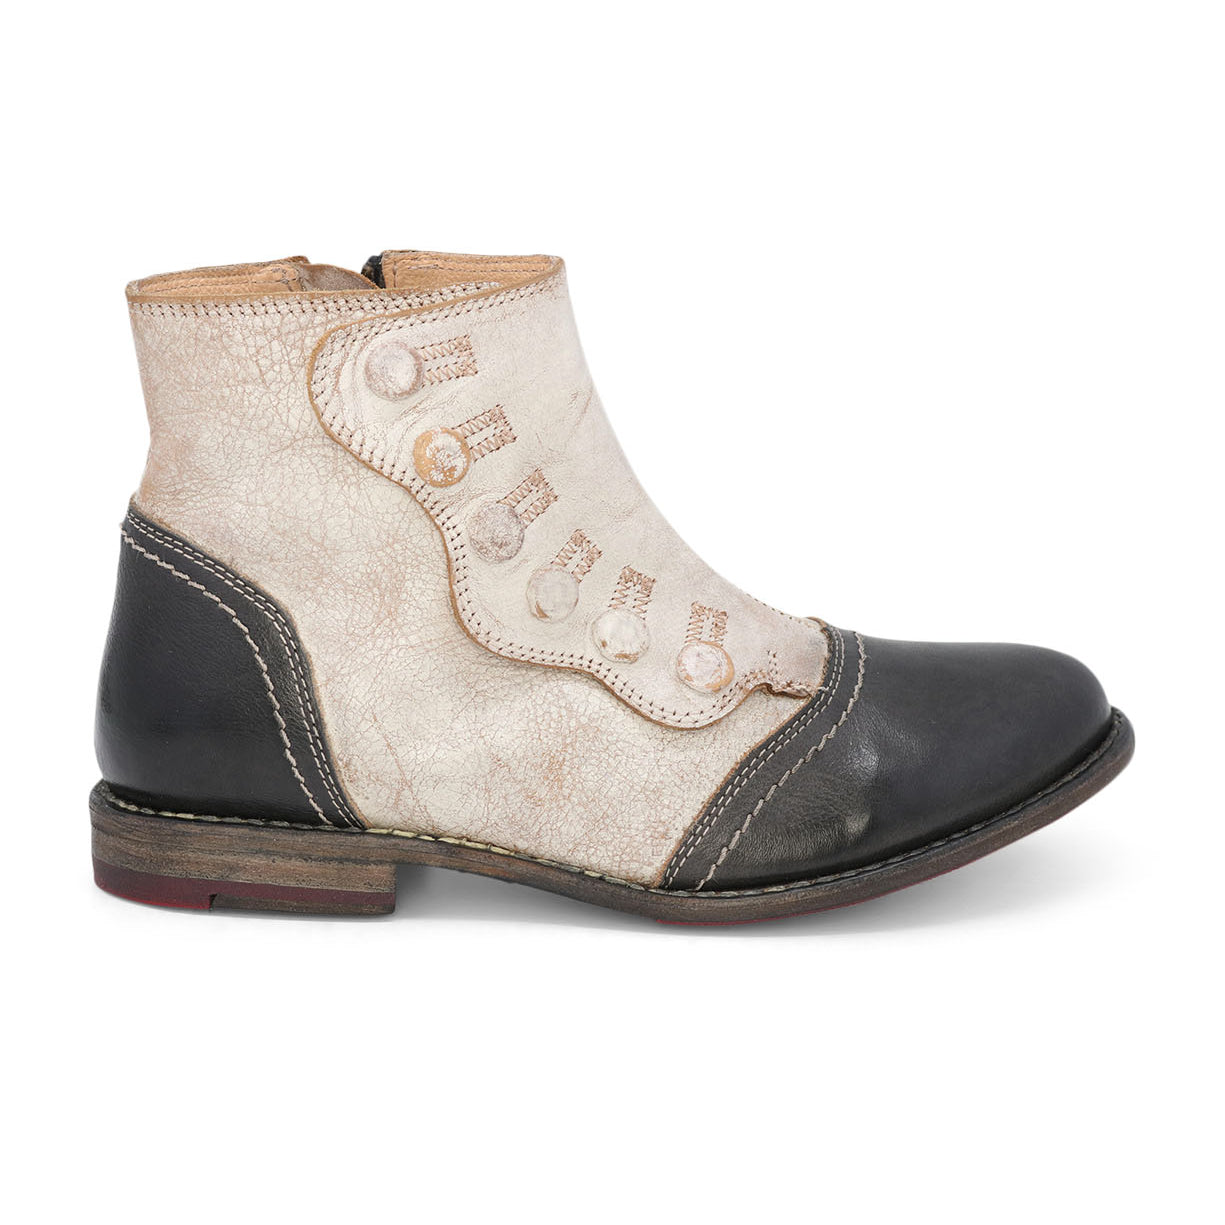 A black and white women's Josephine ankle boot with leather detailing by Oak Tree Farms.